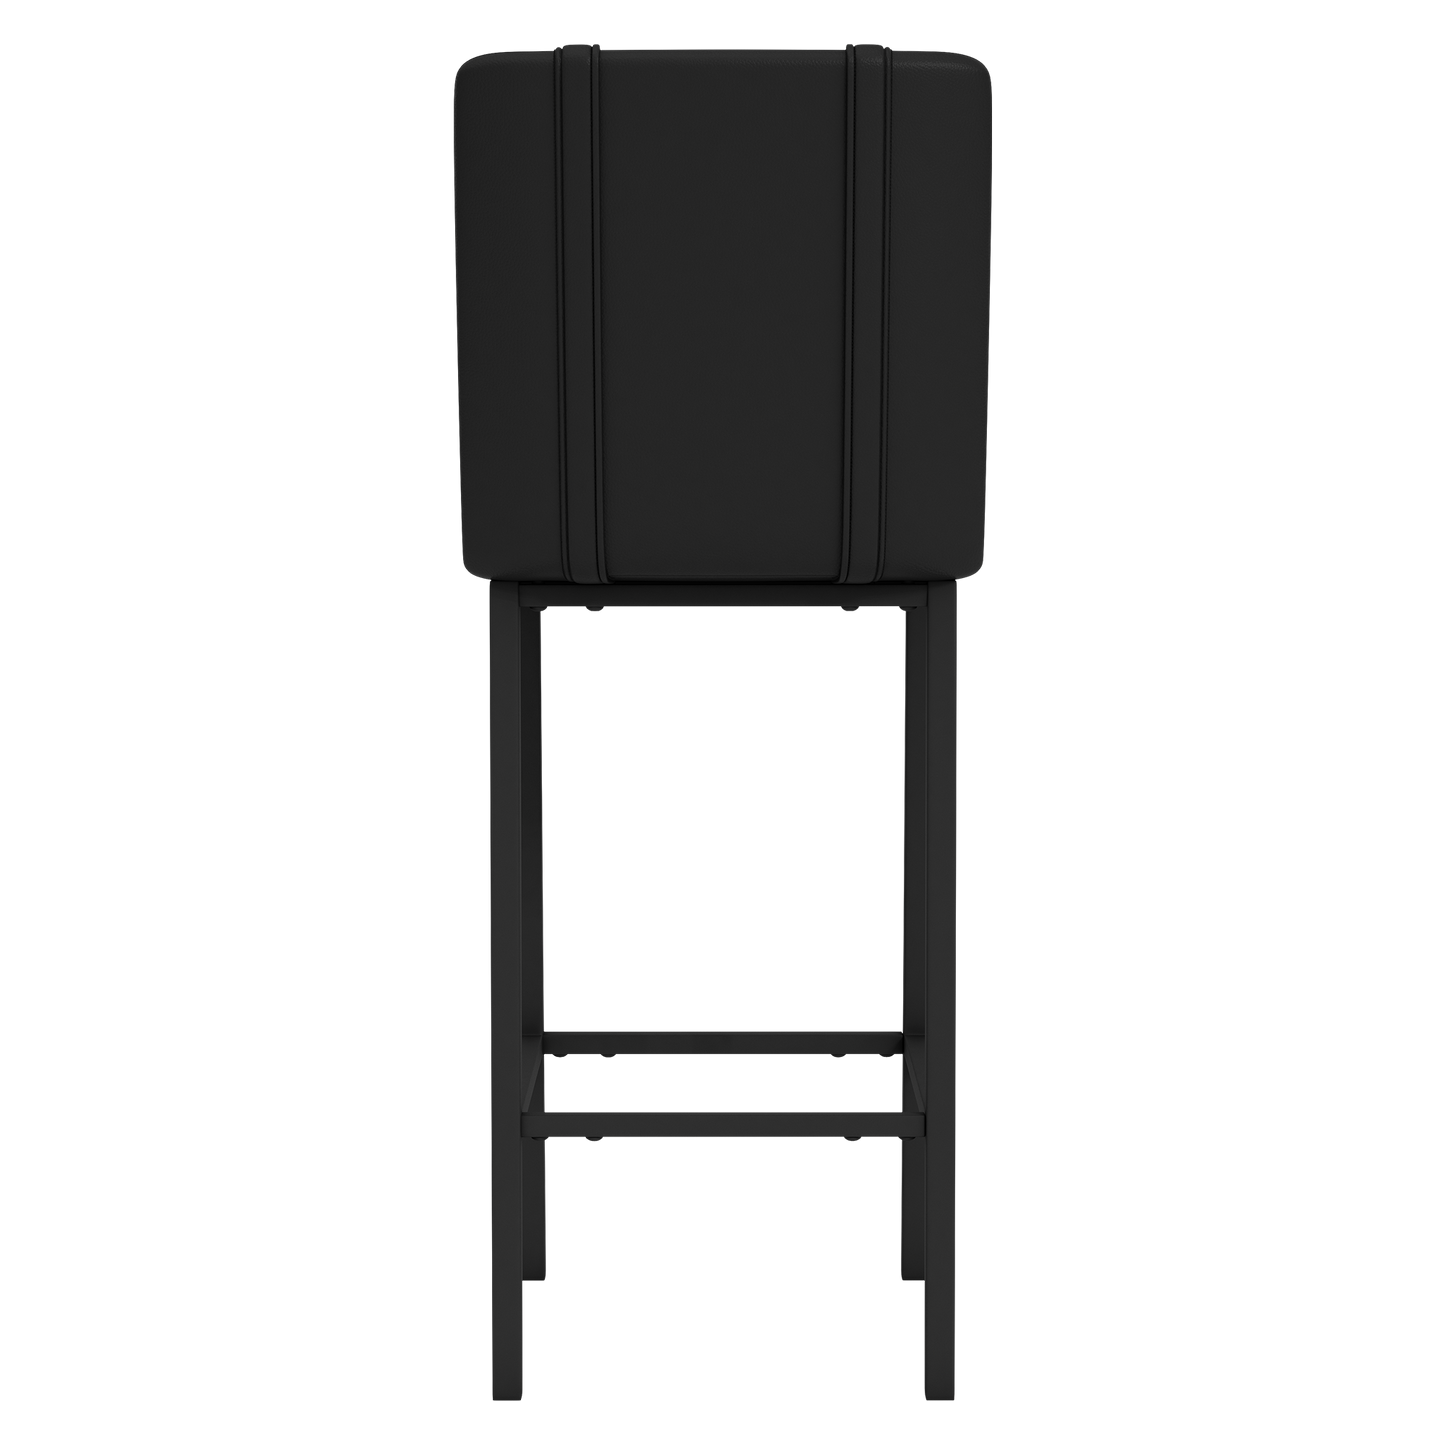 Bar Stool 500 with Mississippi State Secondary Set of 2